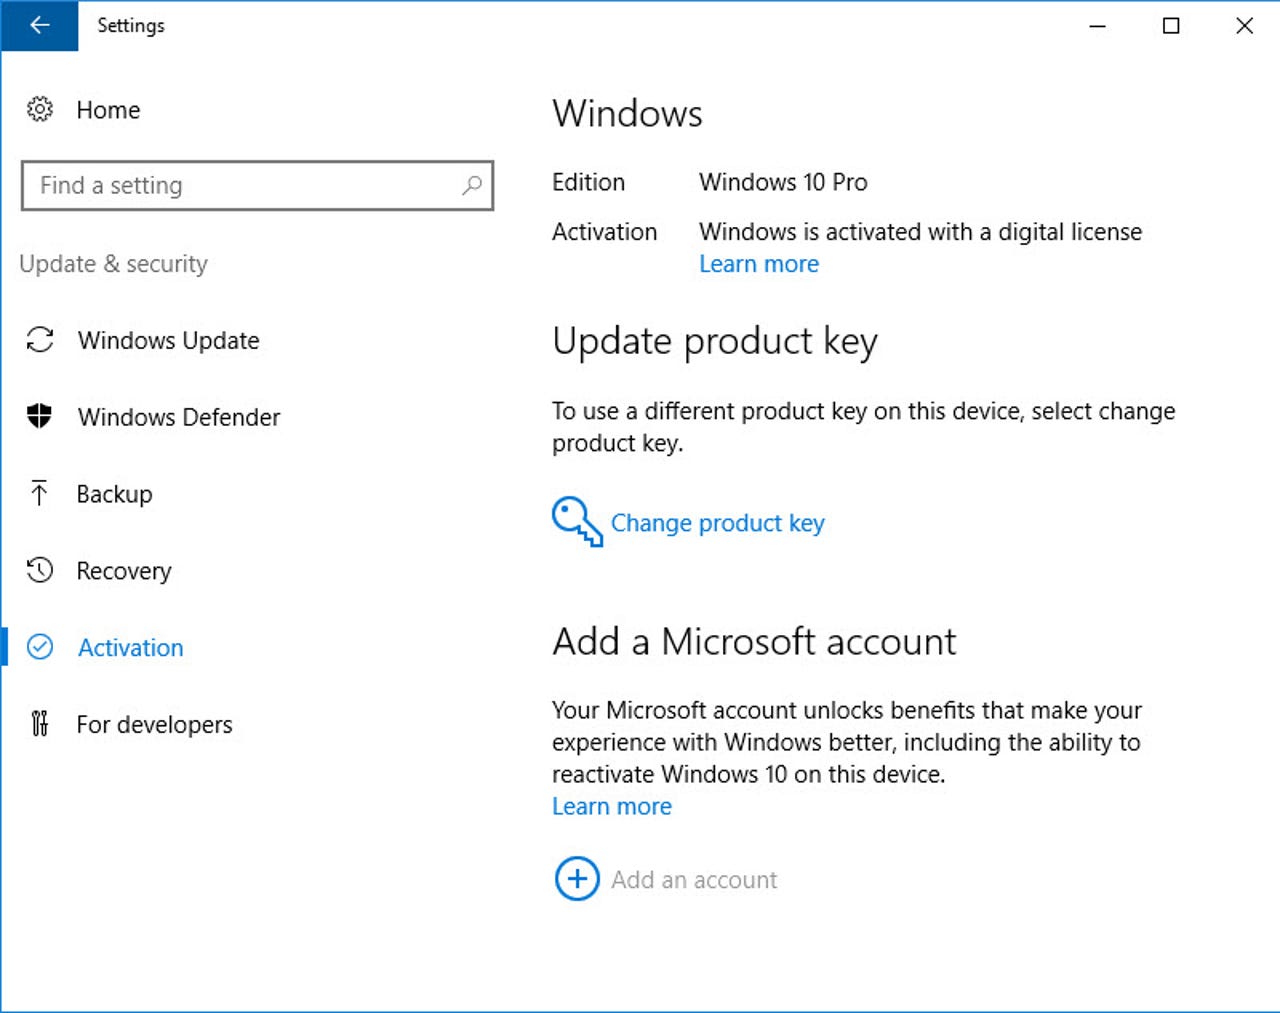 How to link your Windows 10 license to a Microsoft Account